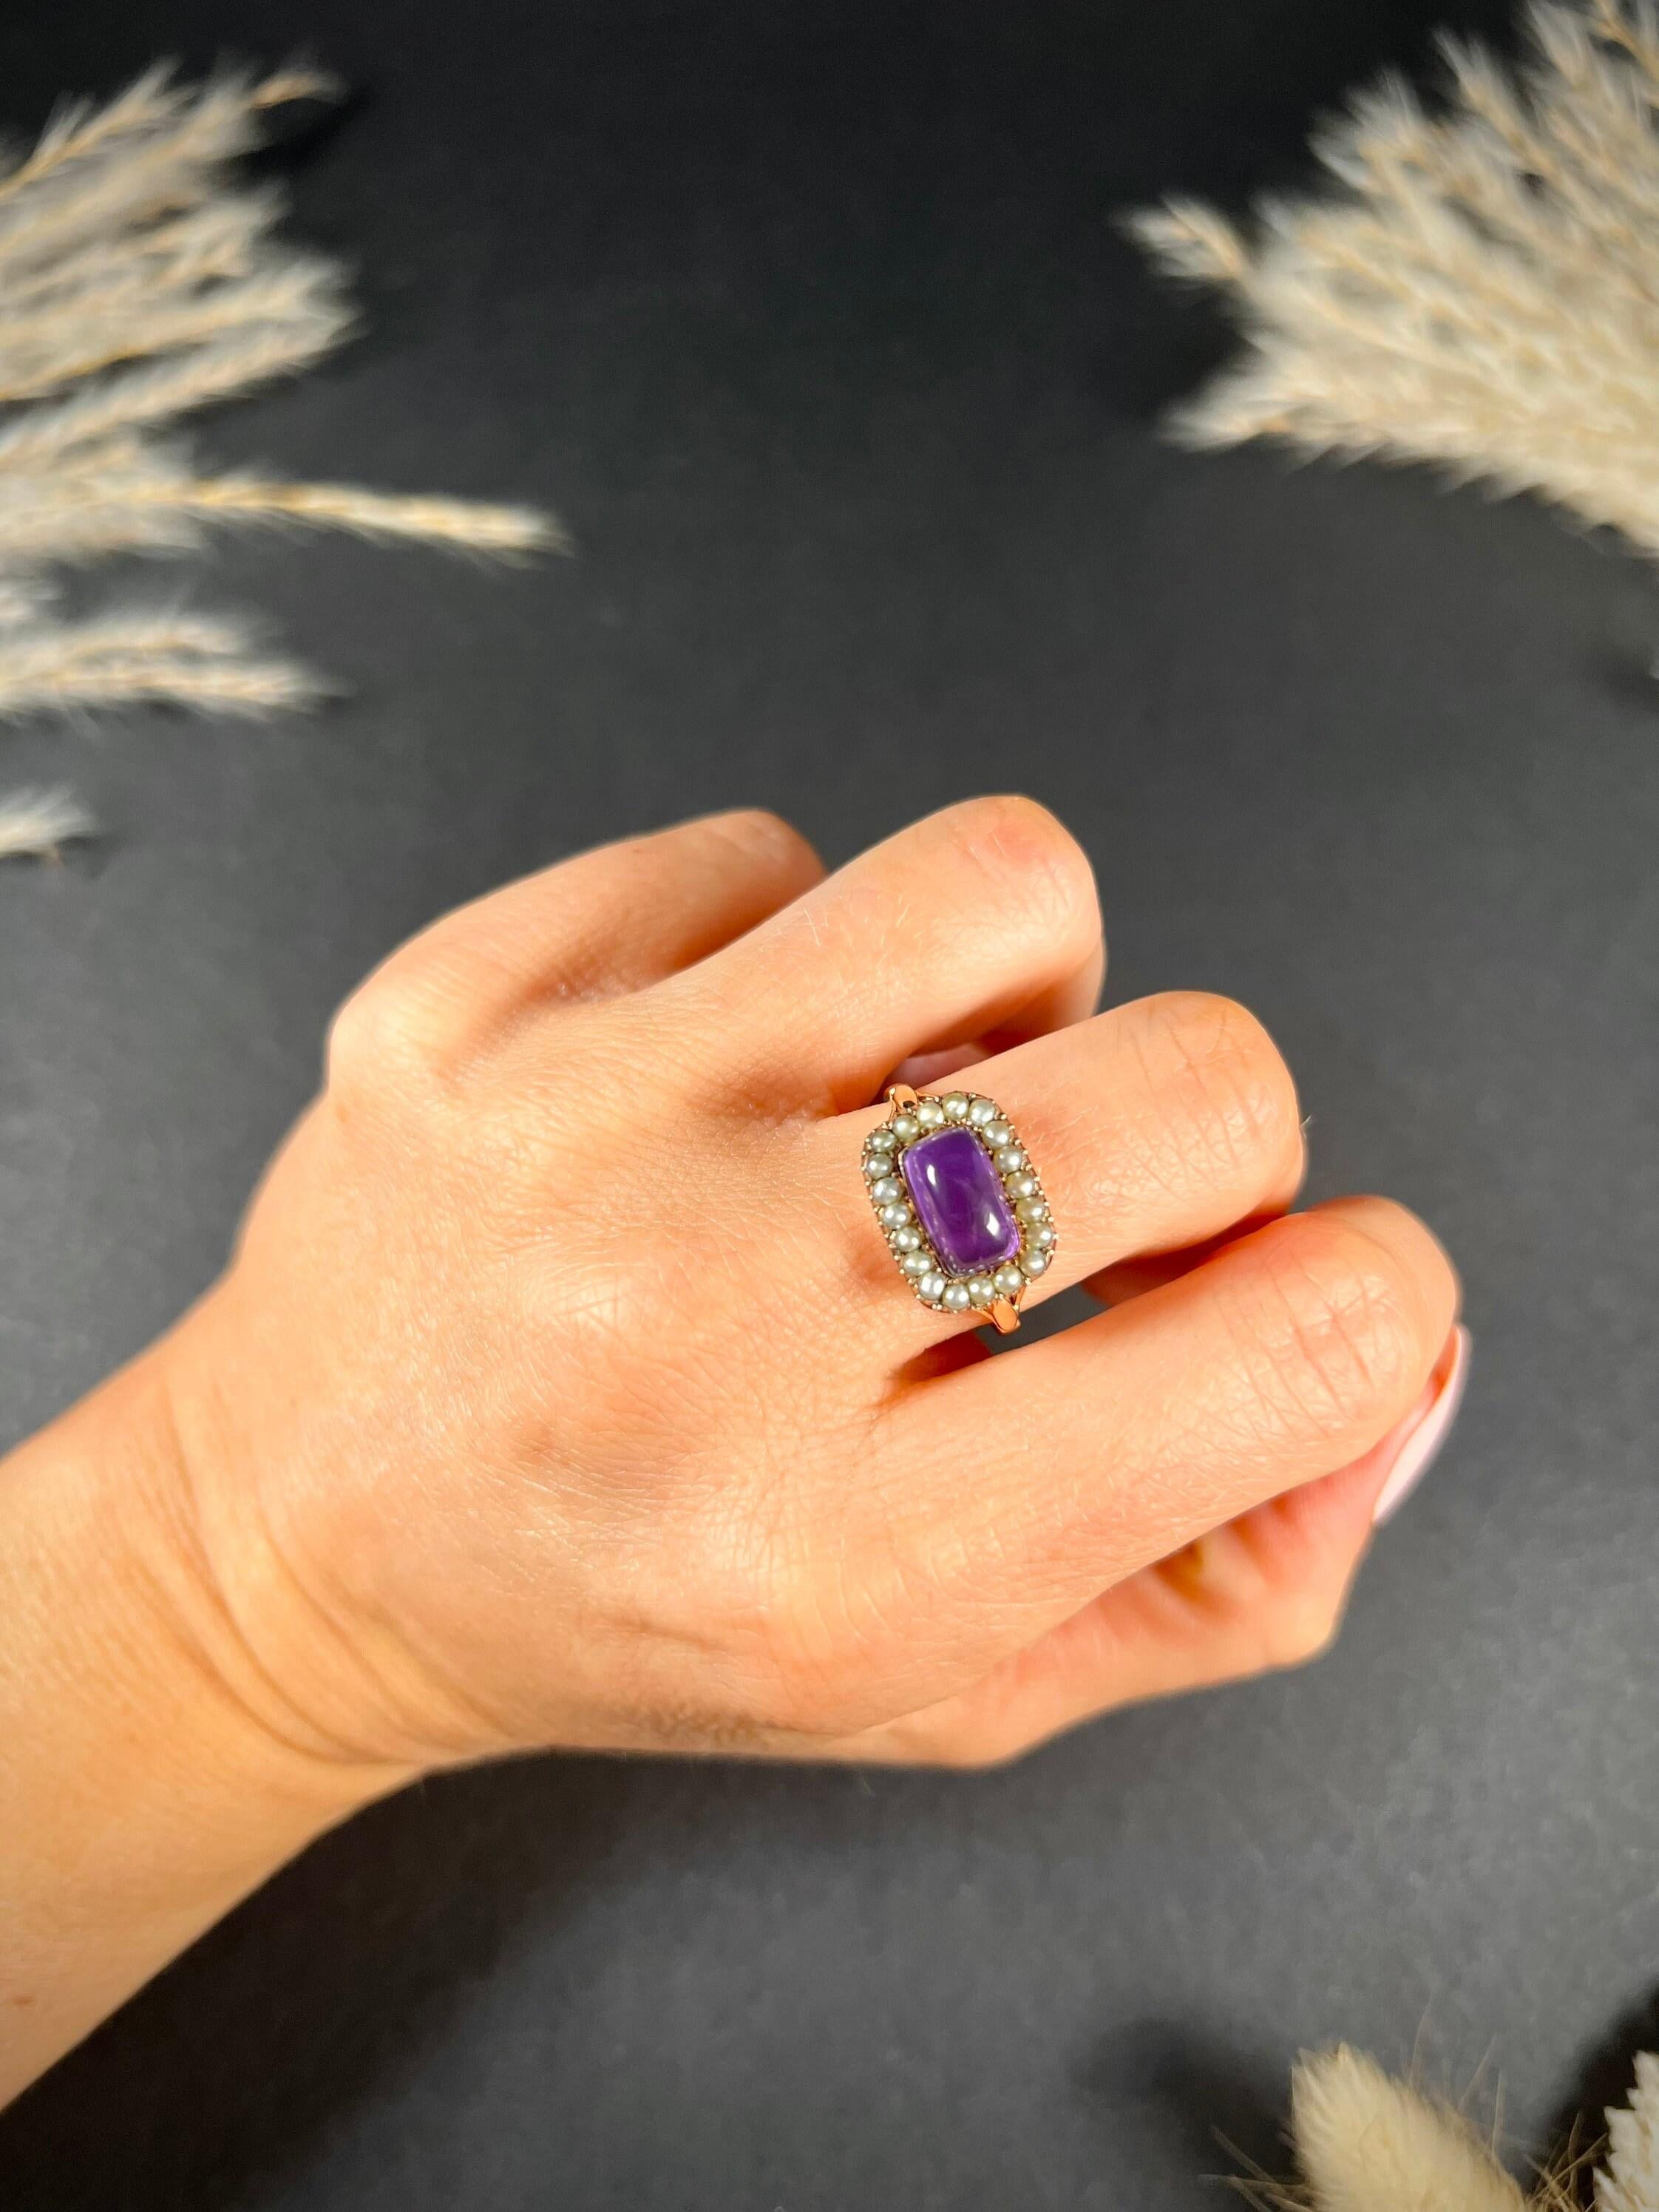 Antique Amethyst Ring

15ct Gold Tested 

Circa 1880

Fabulous, Victorian amethyst ring. Set with a gorgeous sized, cabochon amethyst stone. Surrounded by a beautiful halo of natural seed pearls & mounted on a 15ct yellow gold band with lovely split